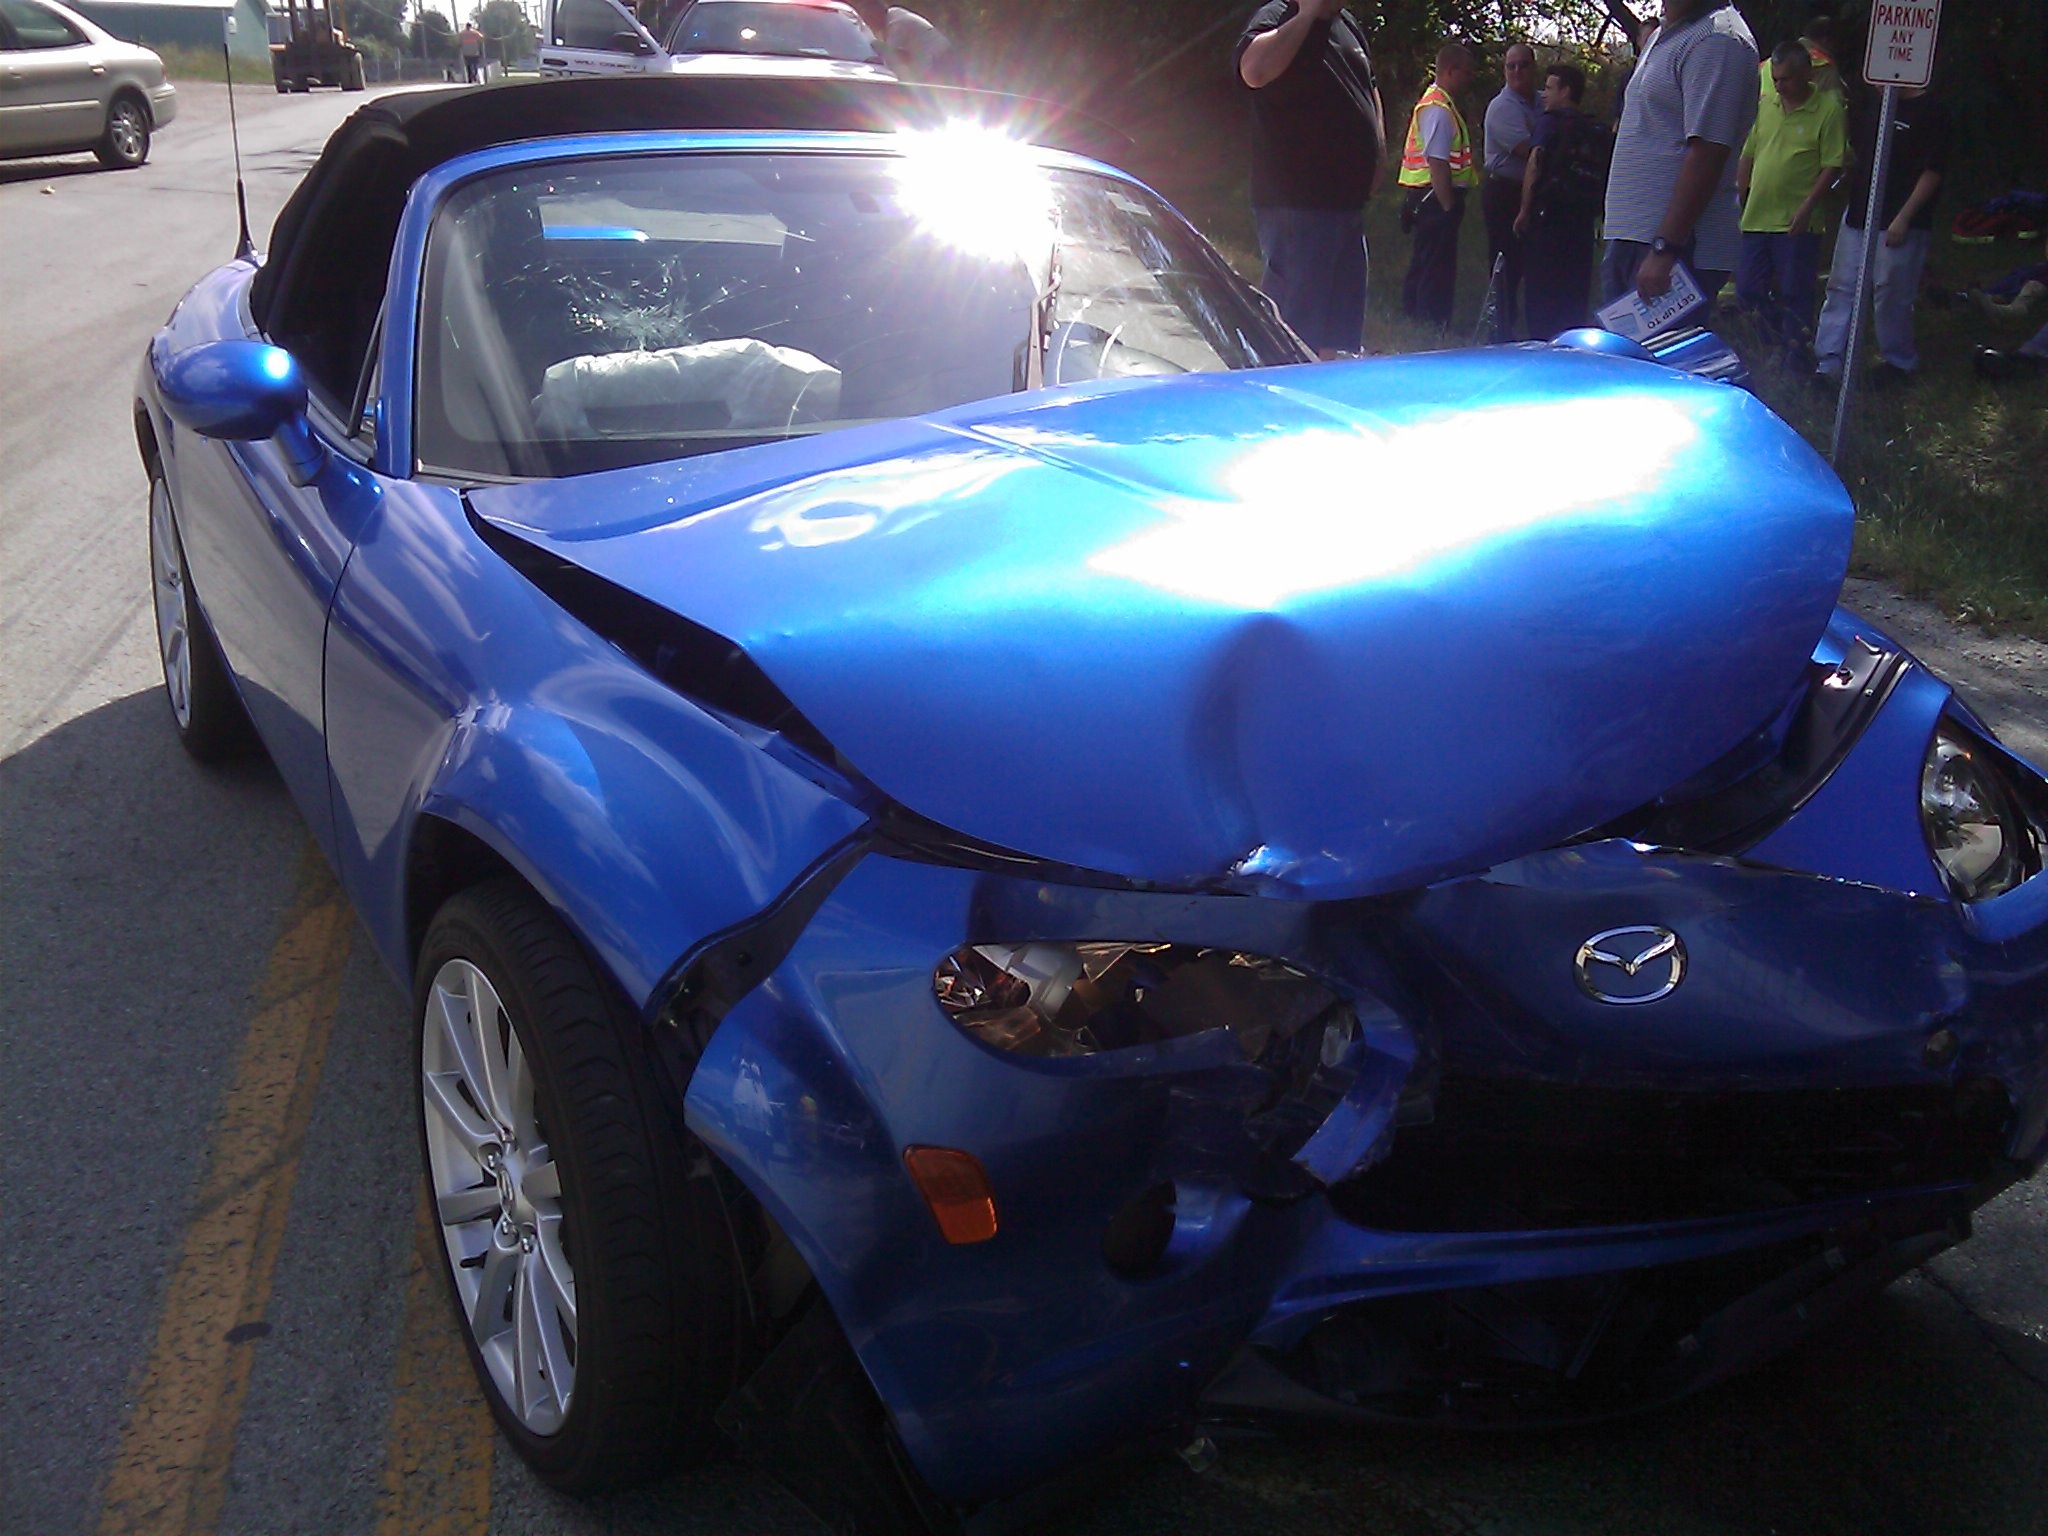 What To Do Immediately After Being in A Car Accident